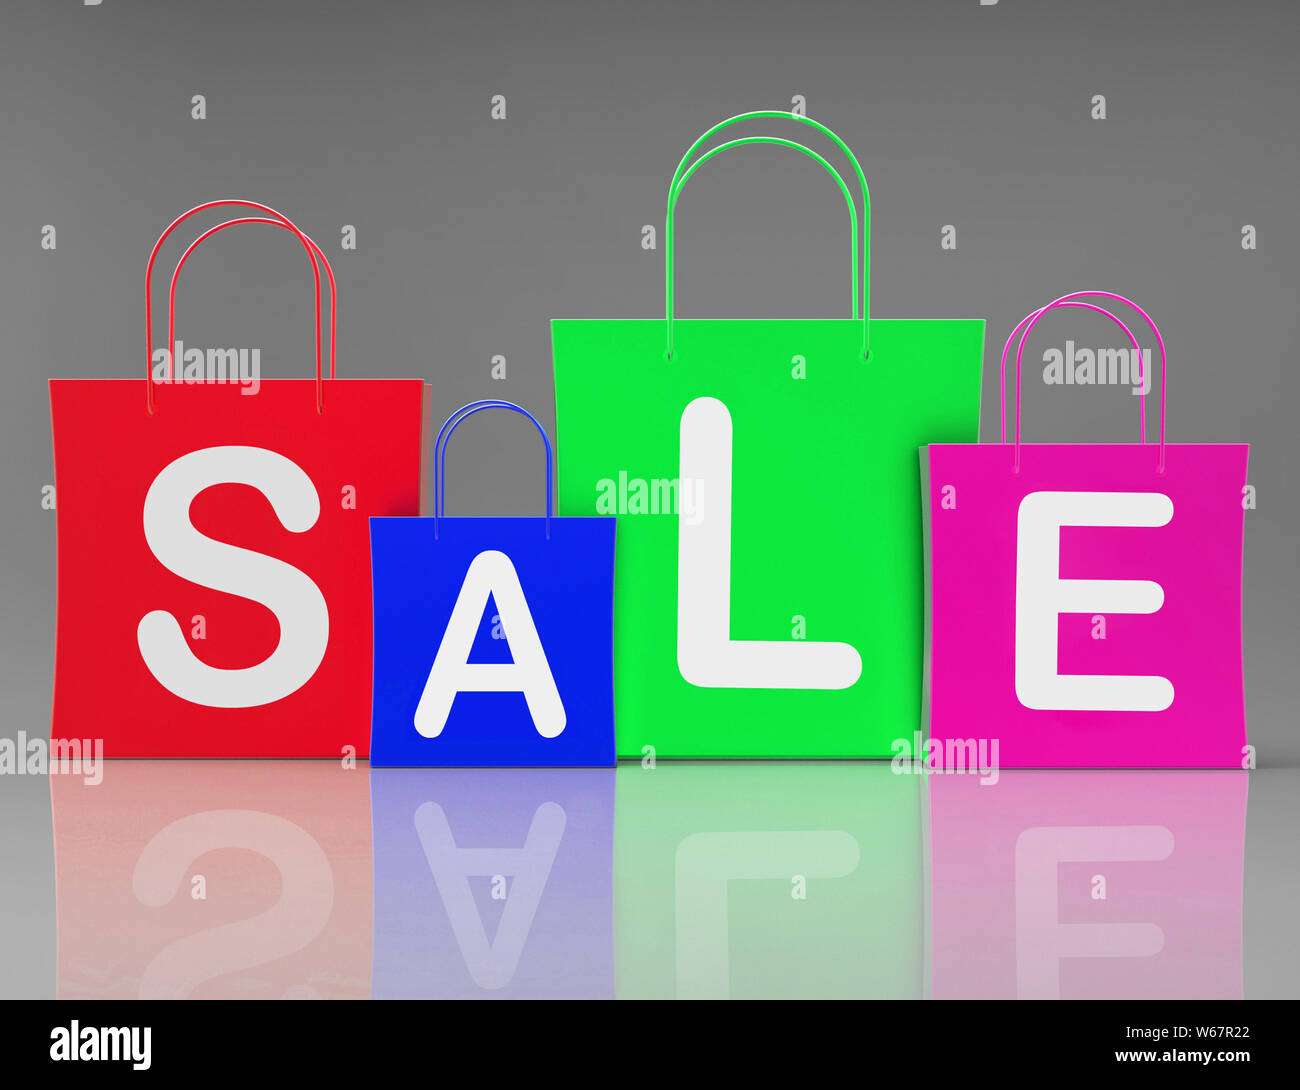 Sale discounts concept icon means best prices and bargains. A reduction in cost or marked down price - 3d illustration Stock Photo